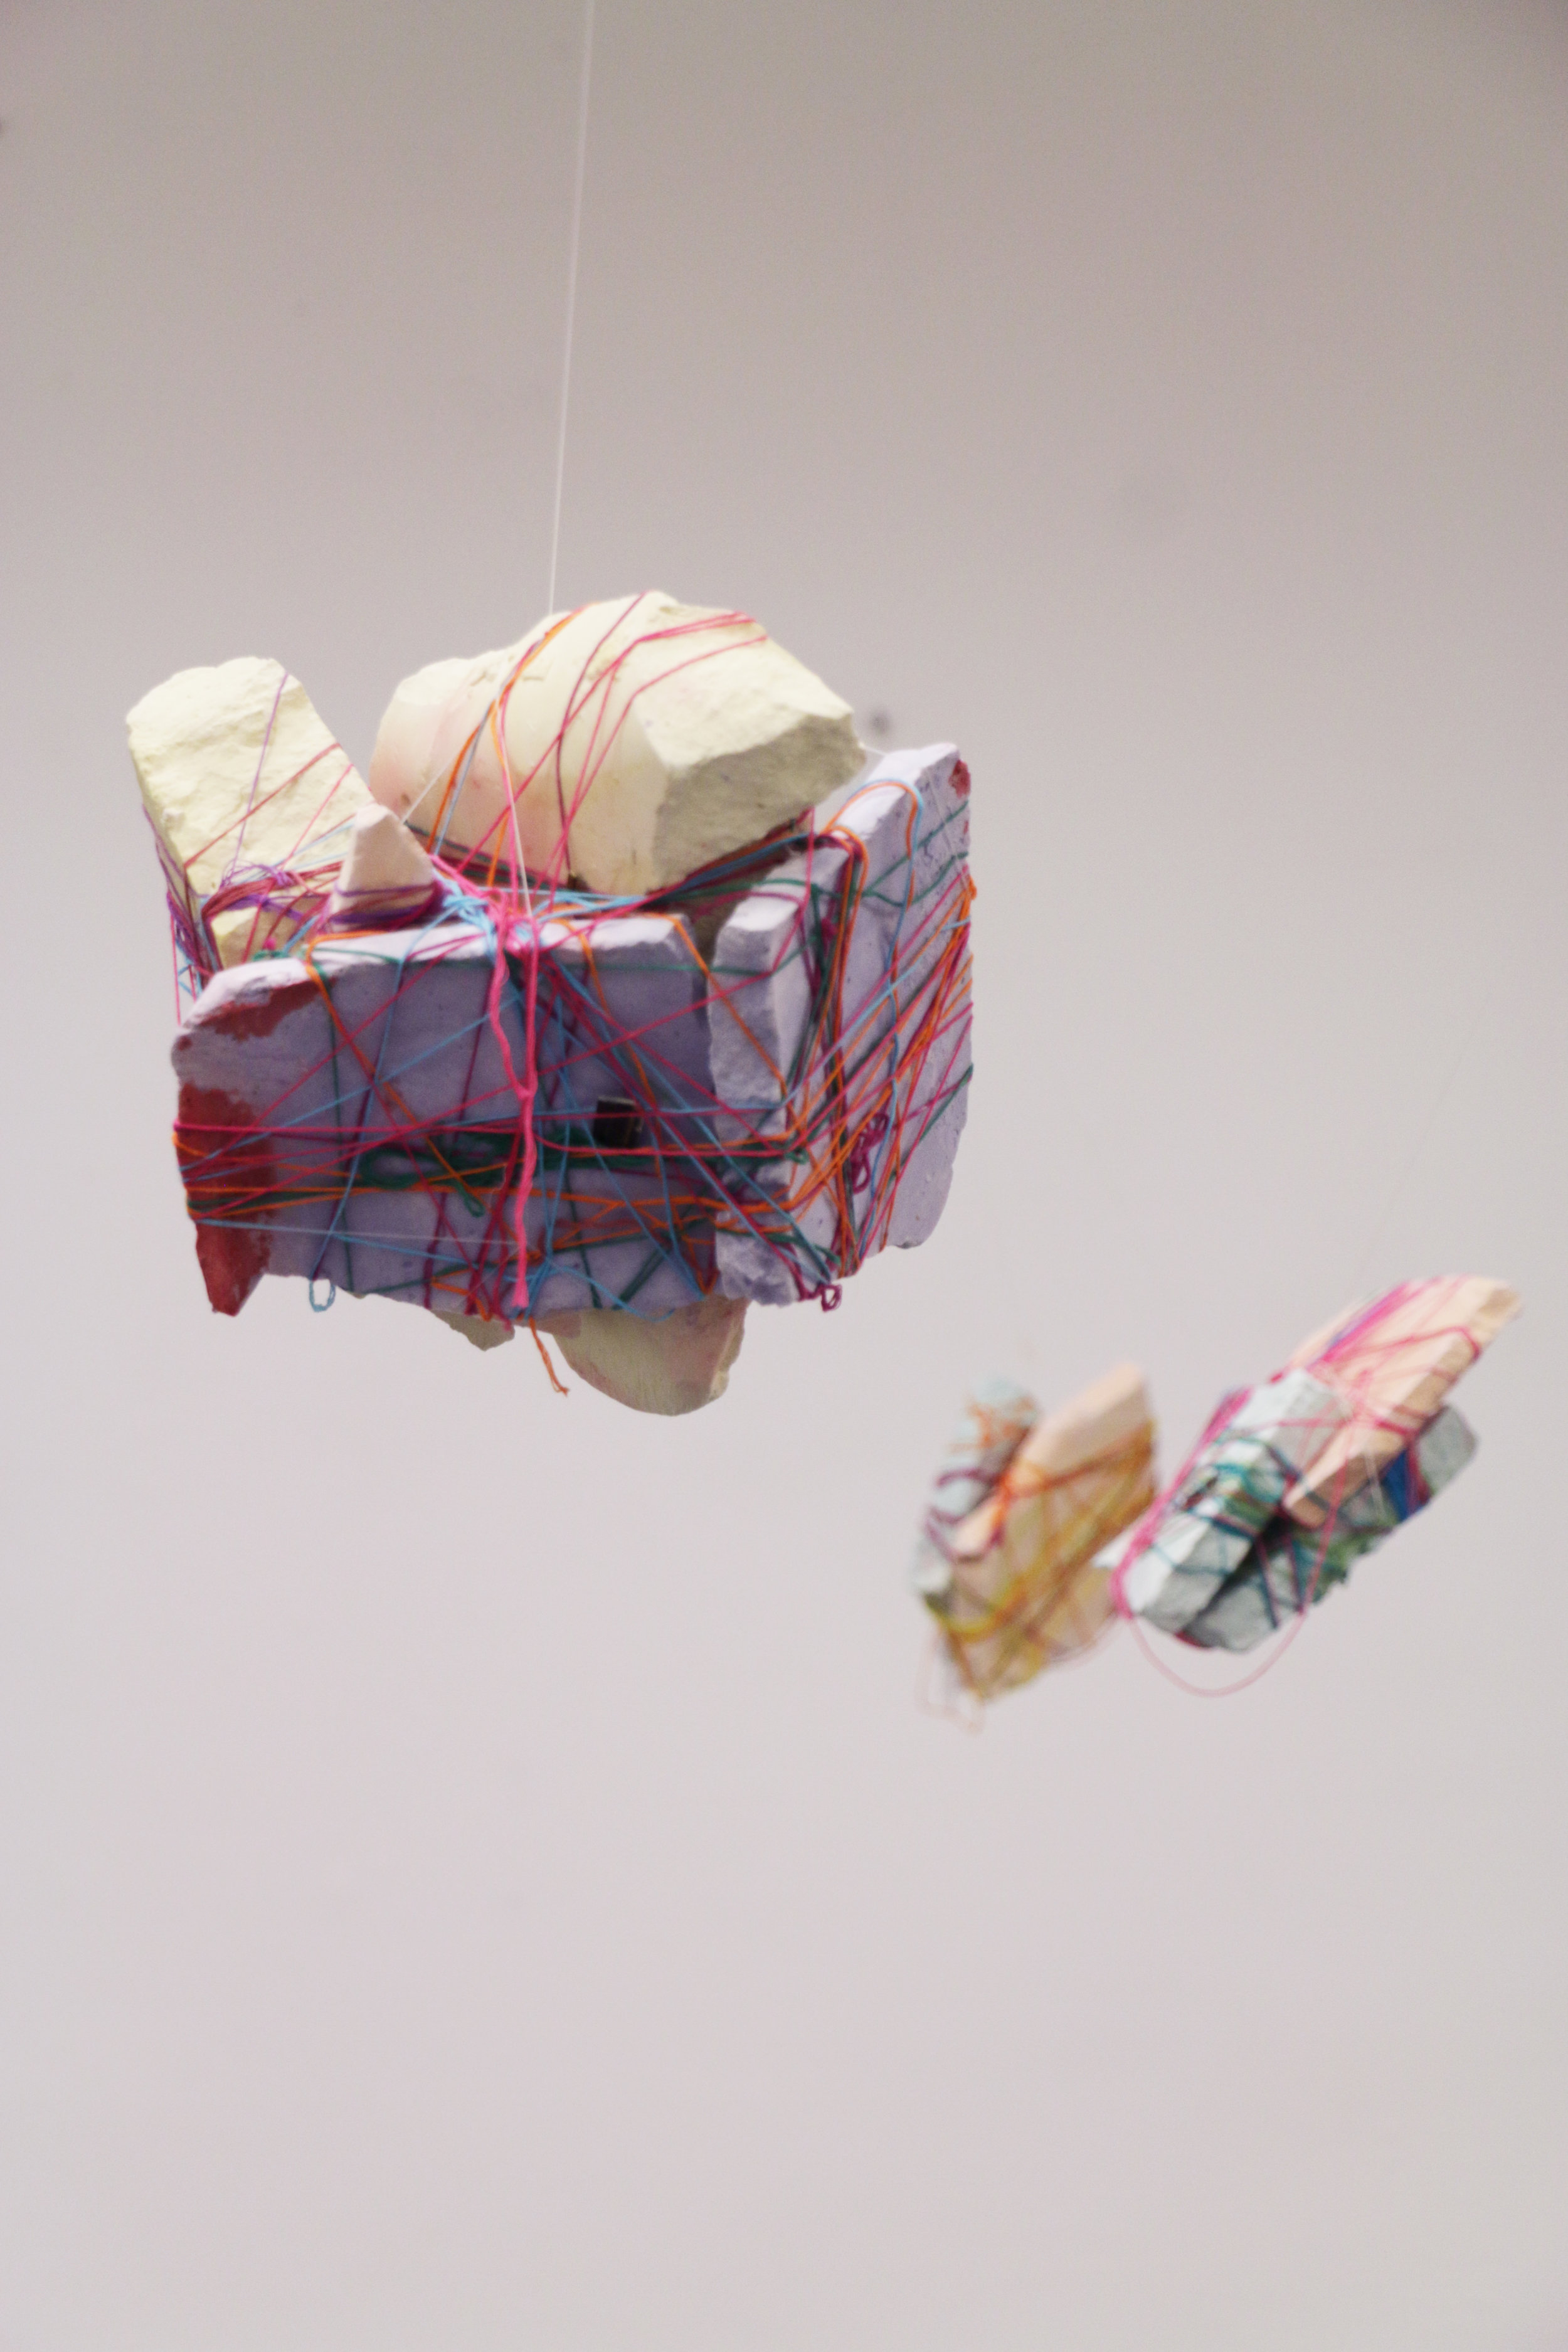   Hanging by a Thread , 2019, plaster and embroidery thread 